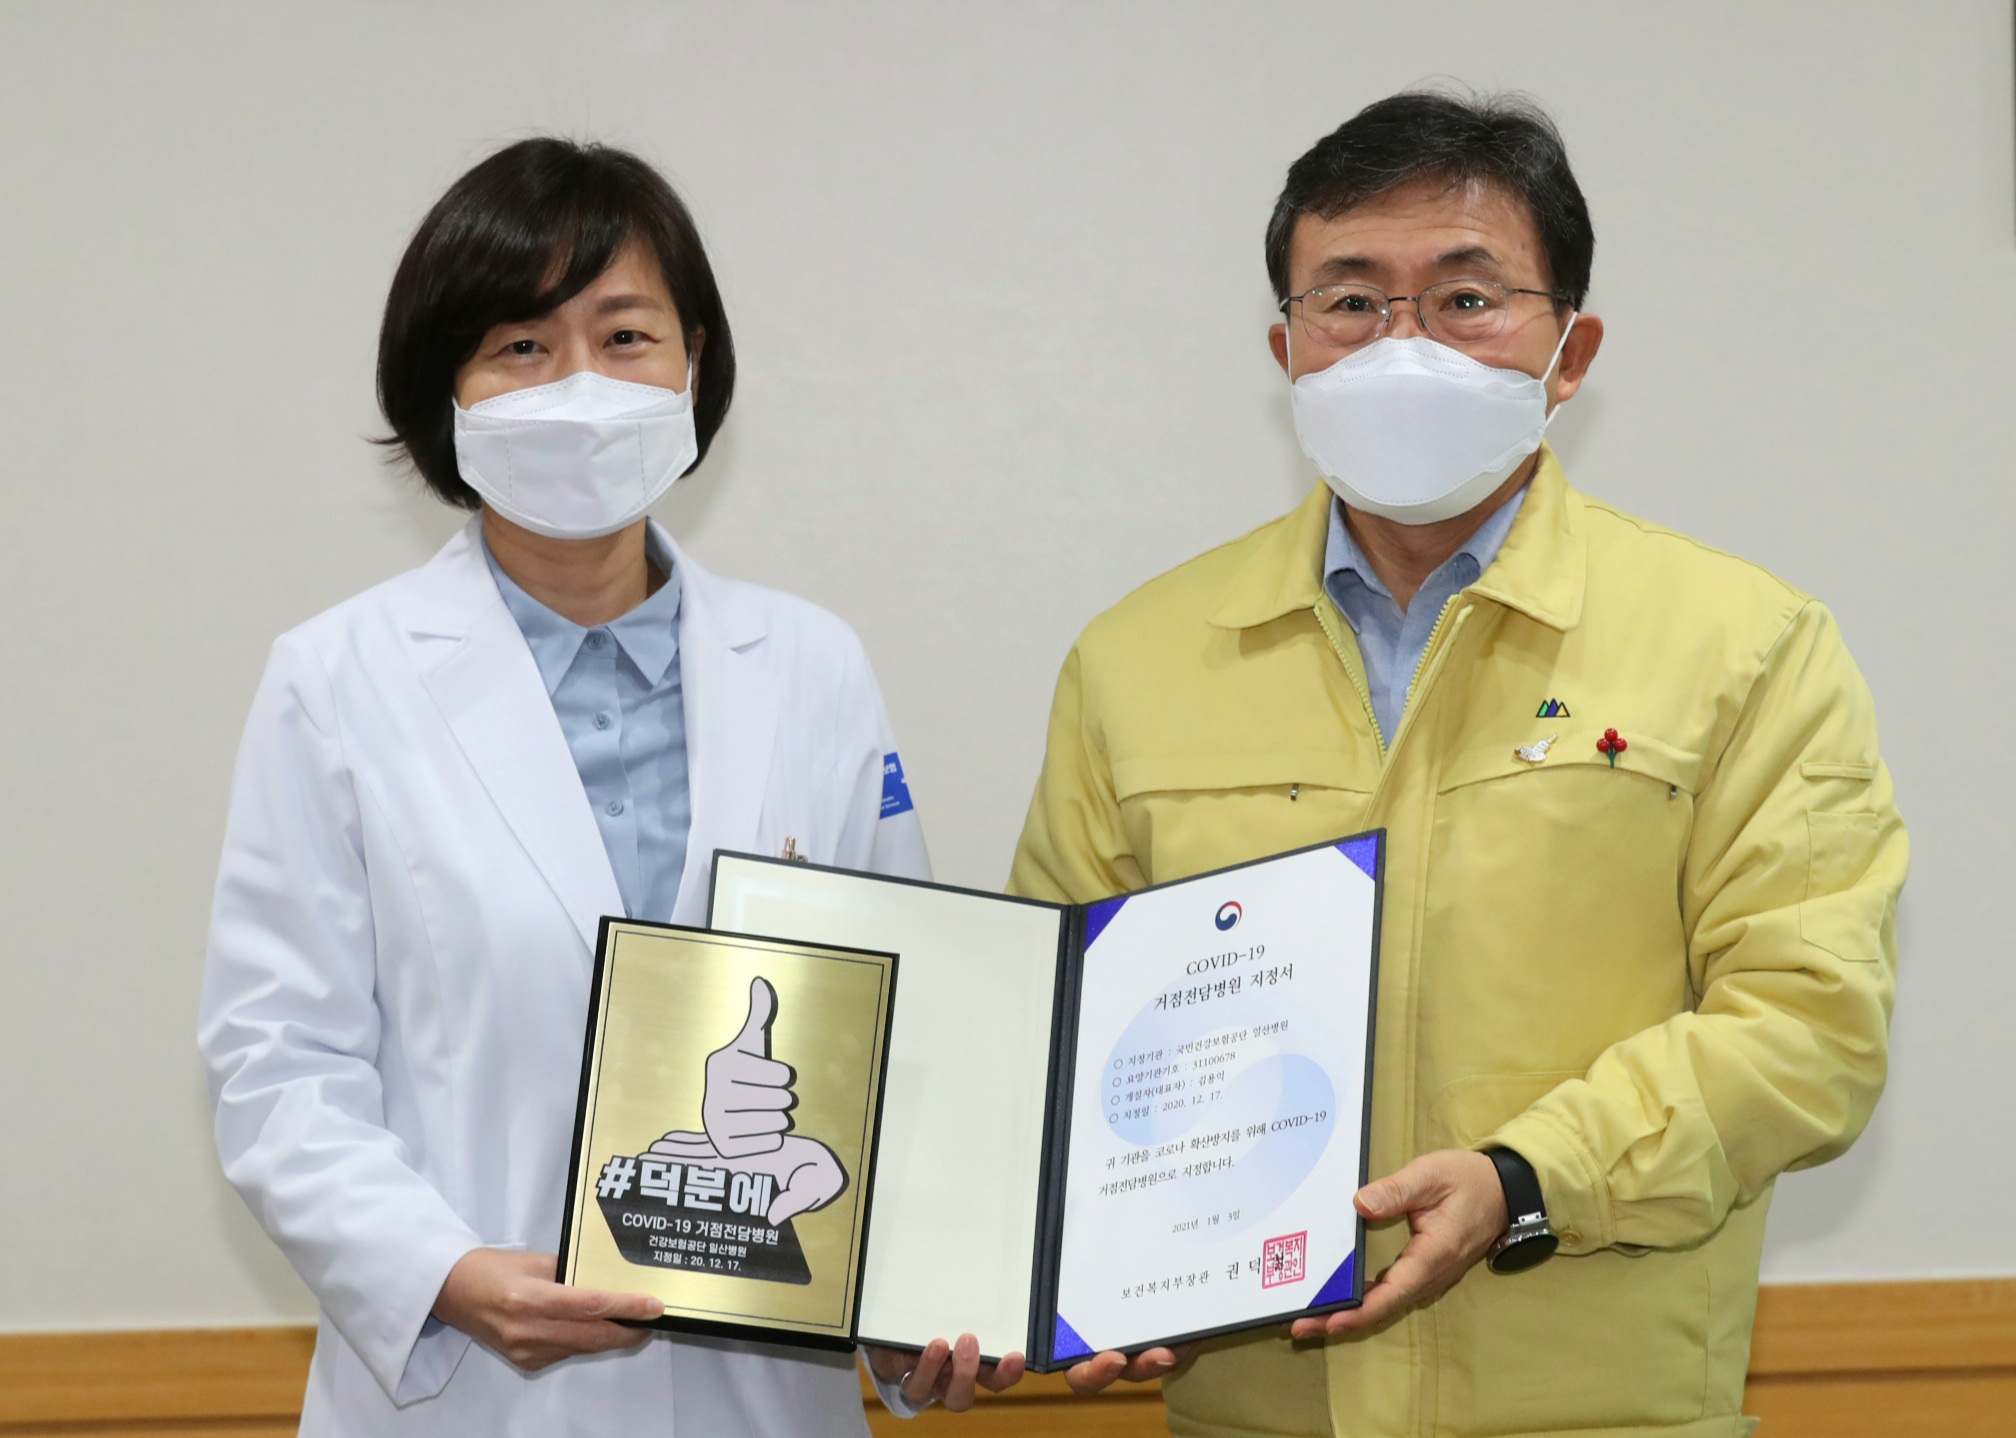 Minister Kwon Checks Hospital Networks in North Gyeonggi for COVID-19 Treatment (January 3) 사진6